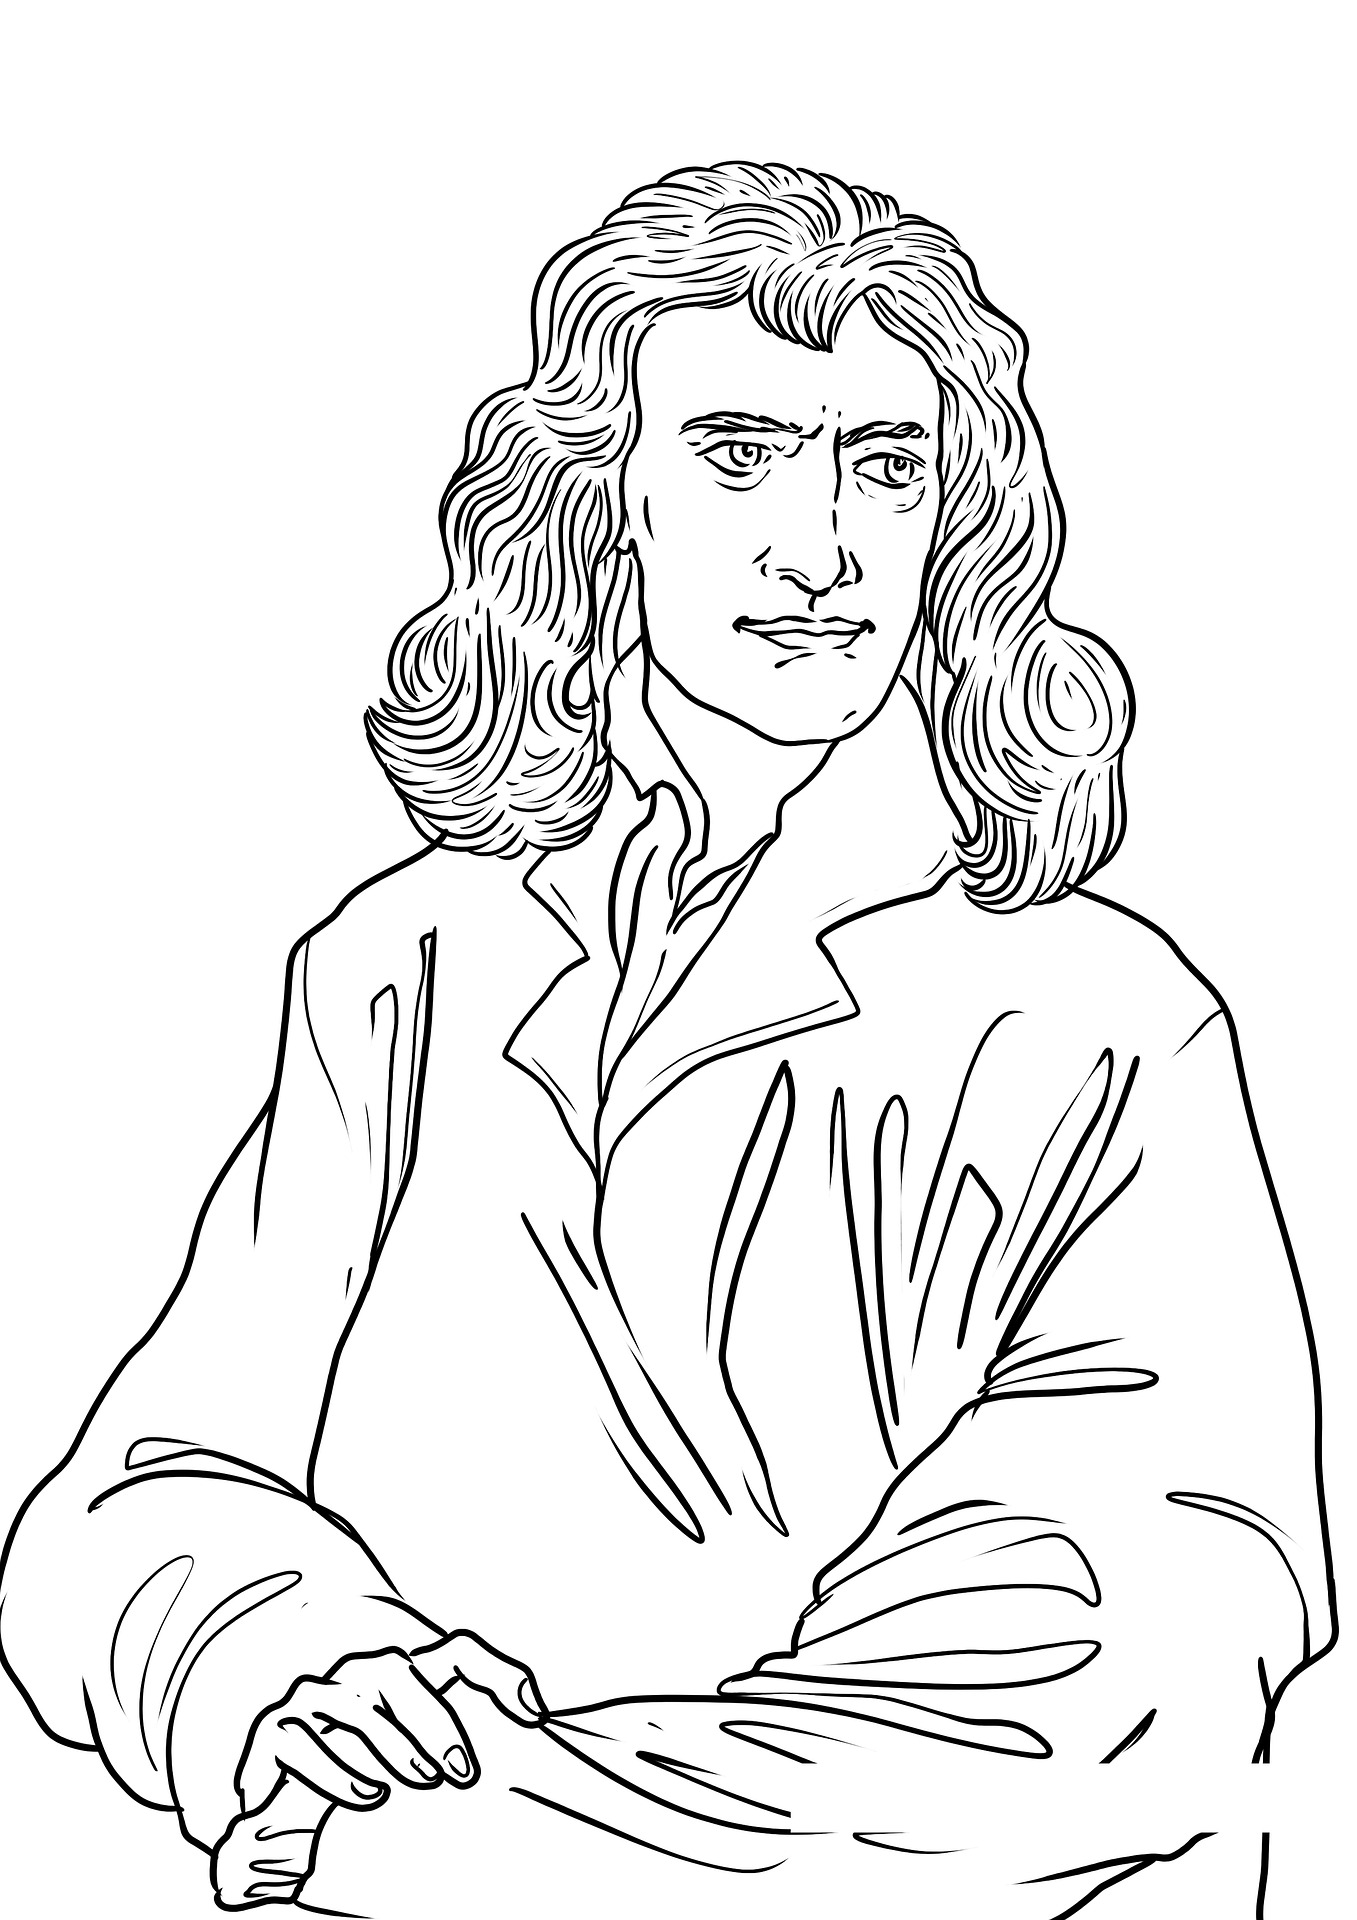 Isaac Newton - Quotes, Facts & Laws